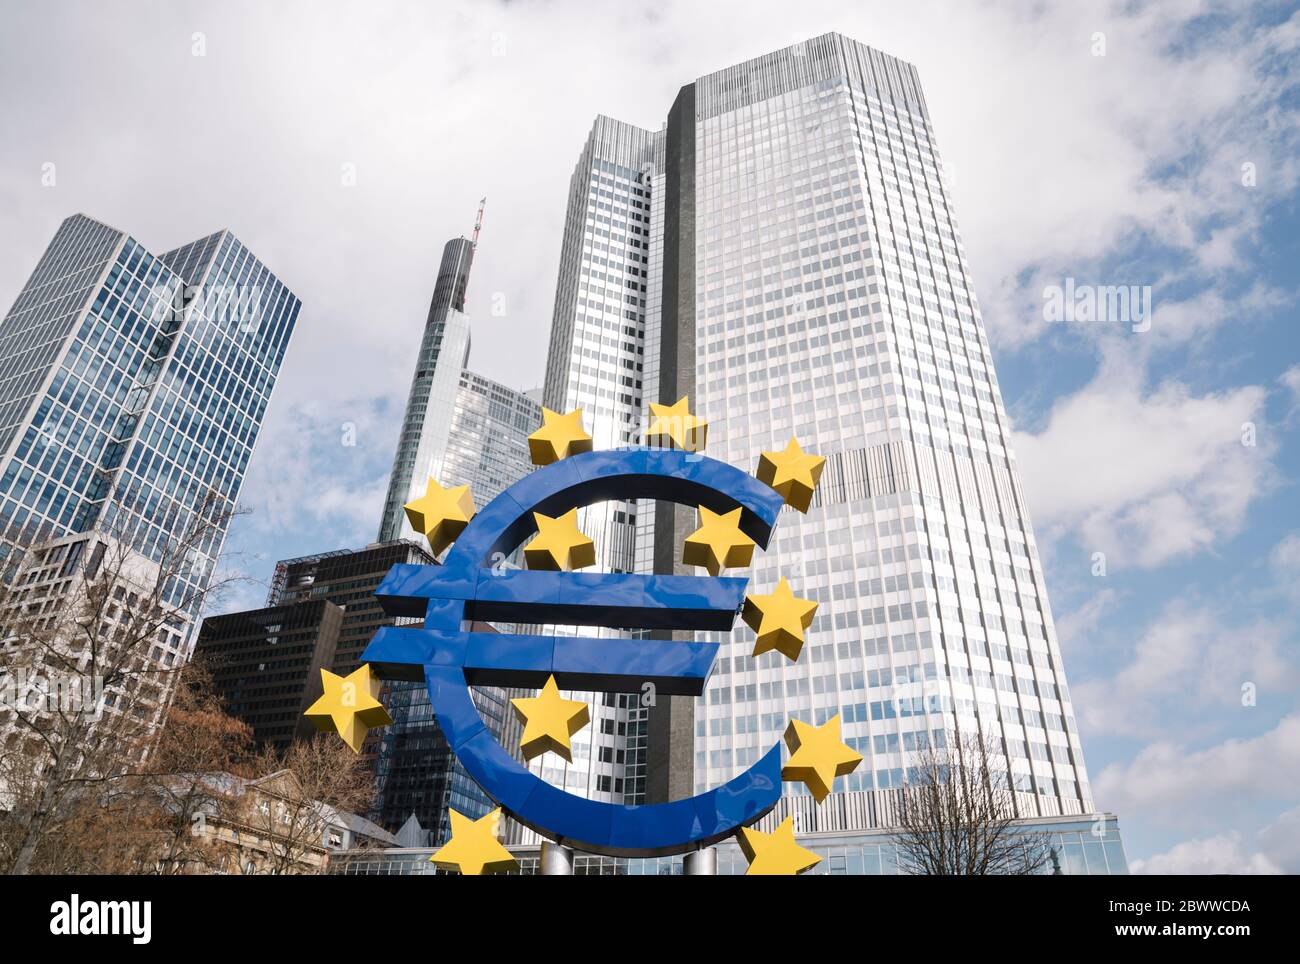 Germany, Hesse, Frankfurt, Low angle view of Euro-Skulptur with Eurotower in background Stock Photo